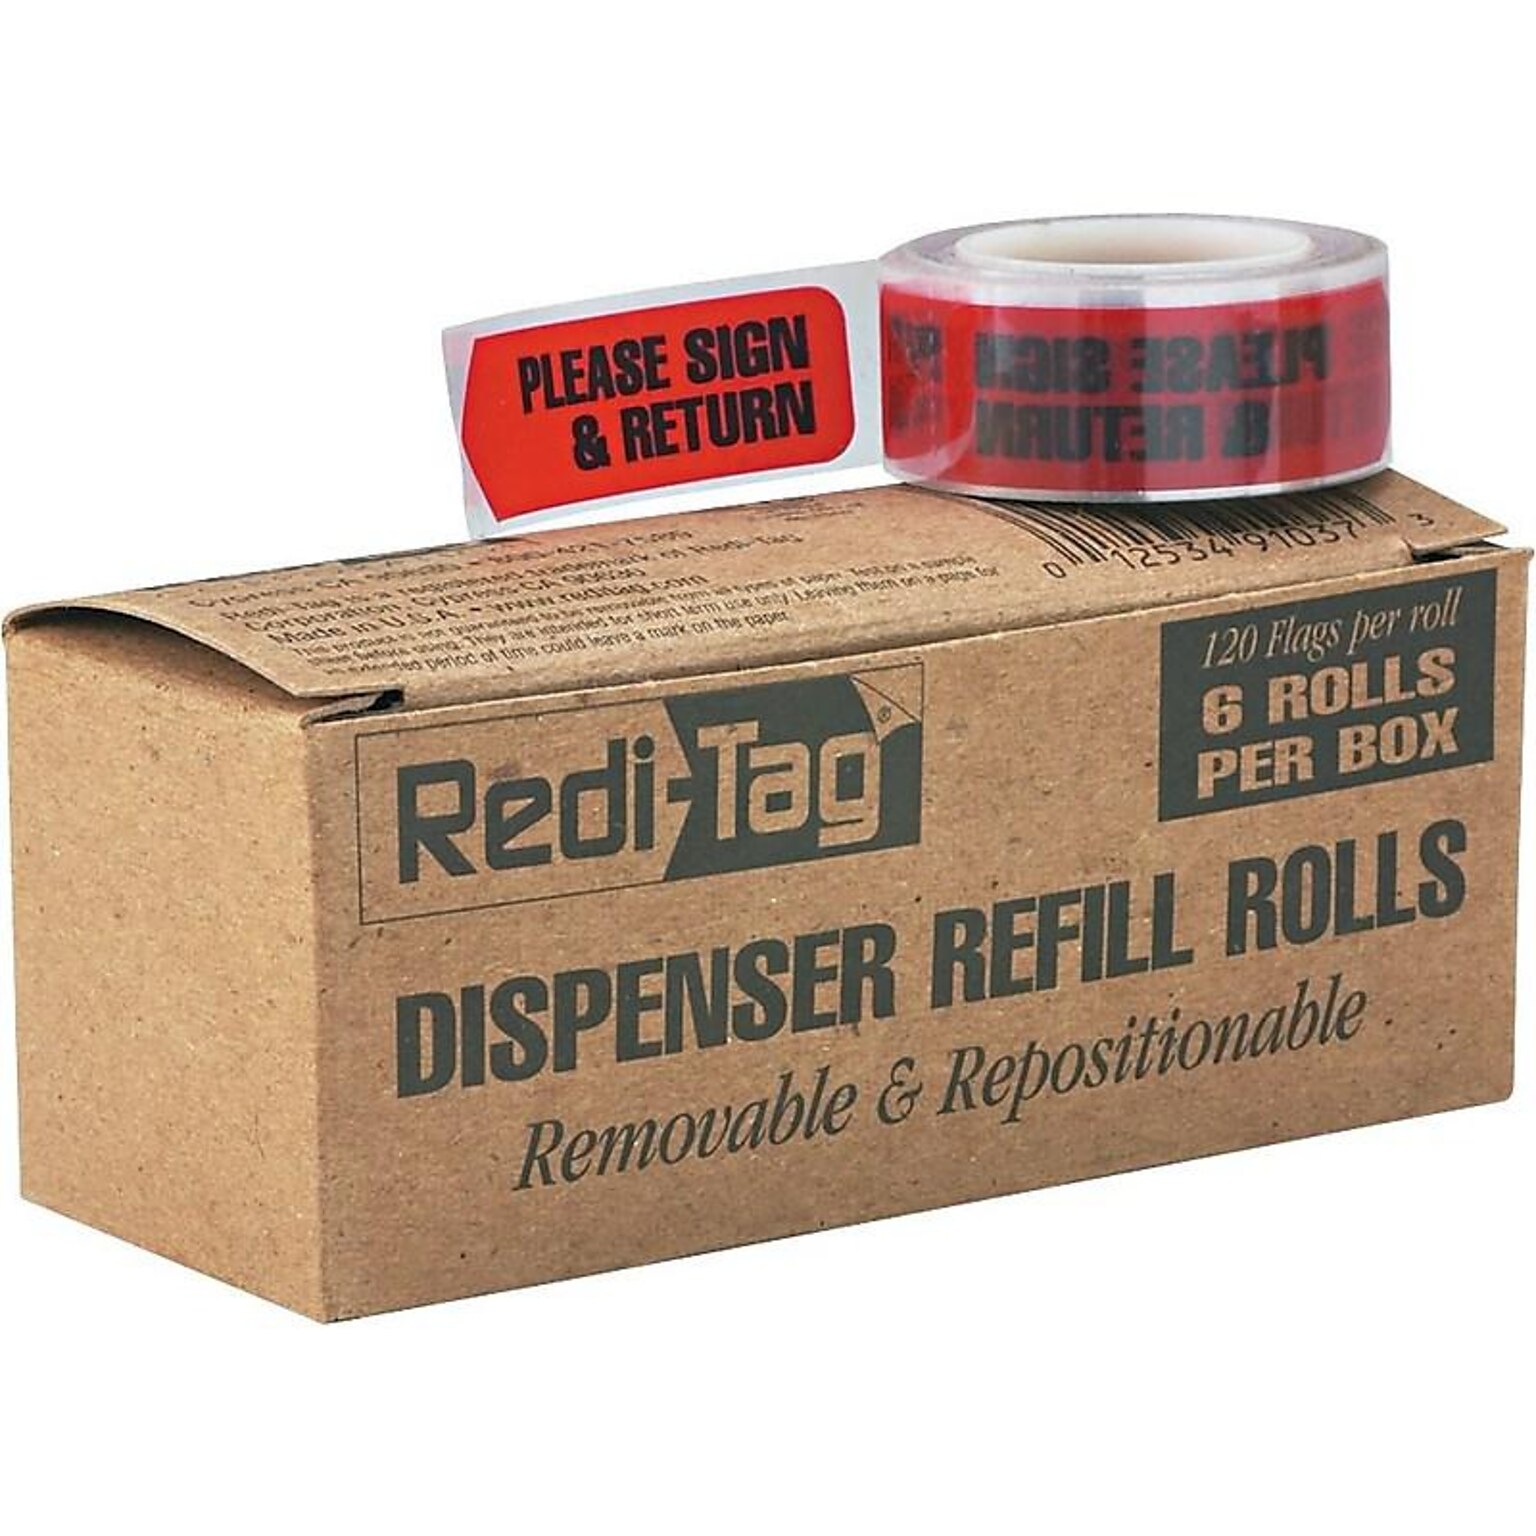 Redi-Tag Printed Arrows Flags, PLEASE SIGN & RETURN, Red, 9/16 x 2, 120/Roll, 6 Rolls/Pack (91037)